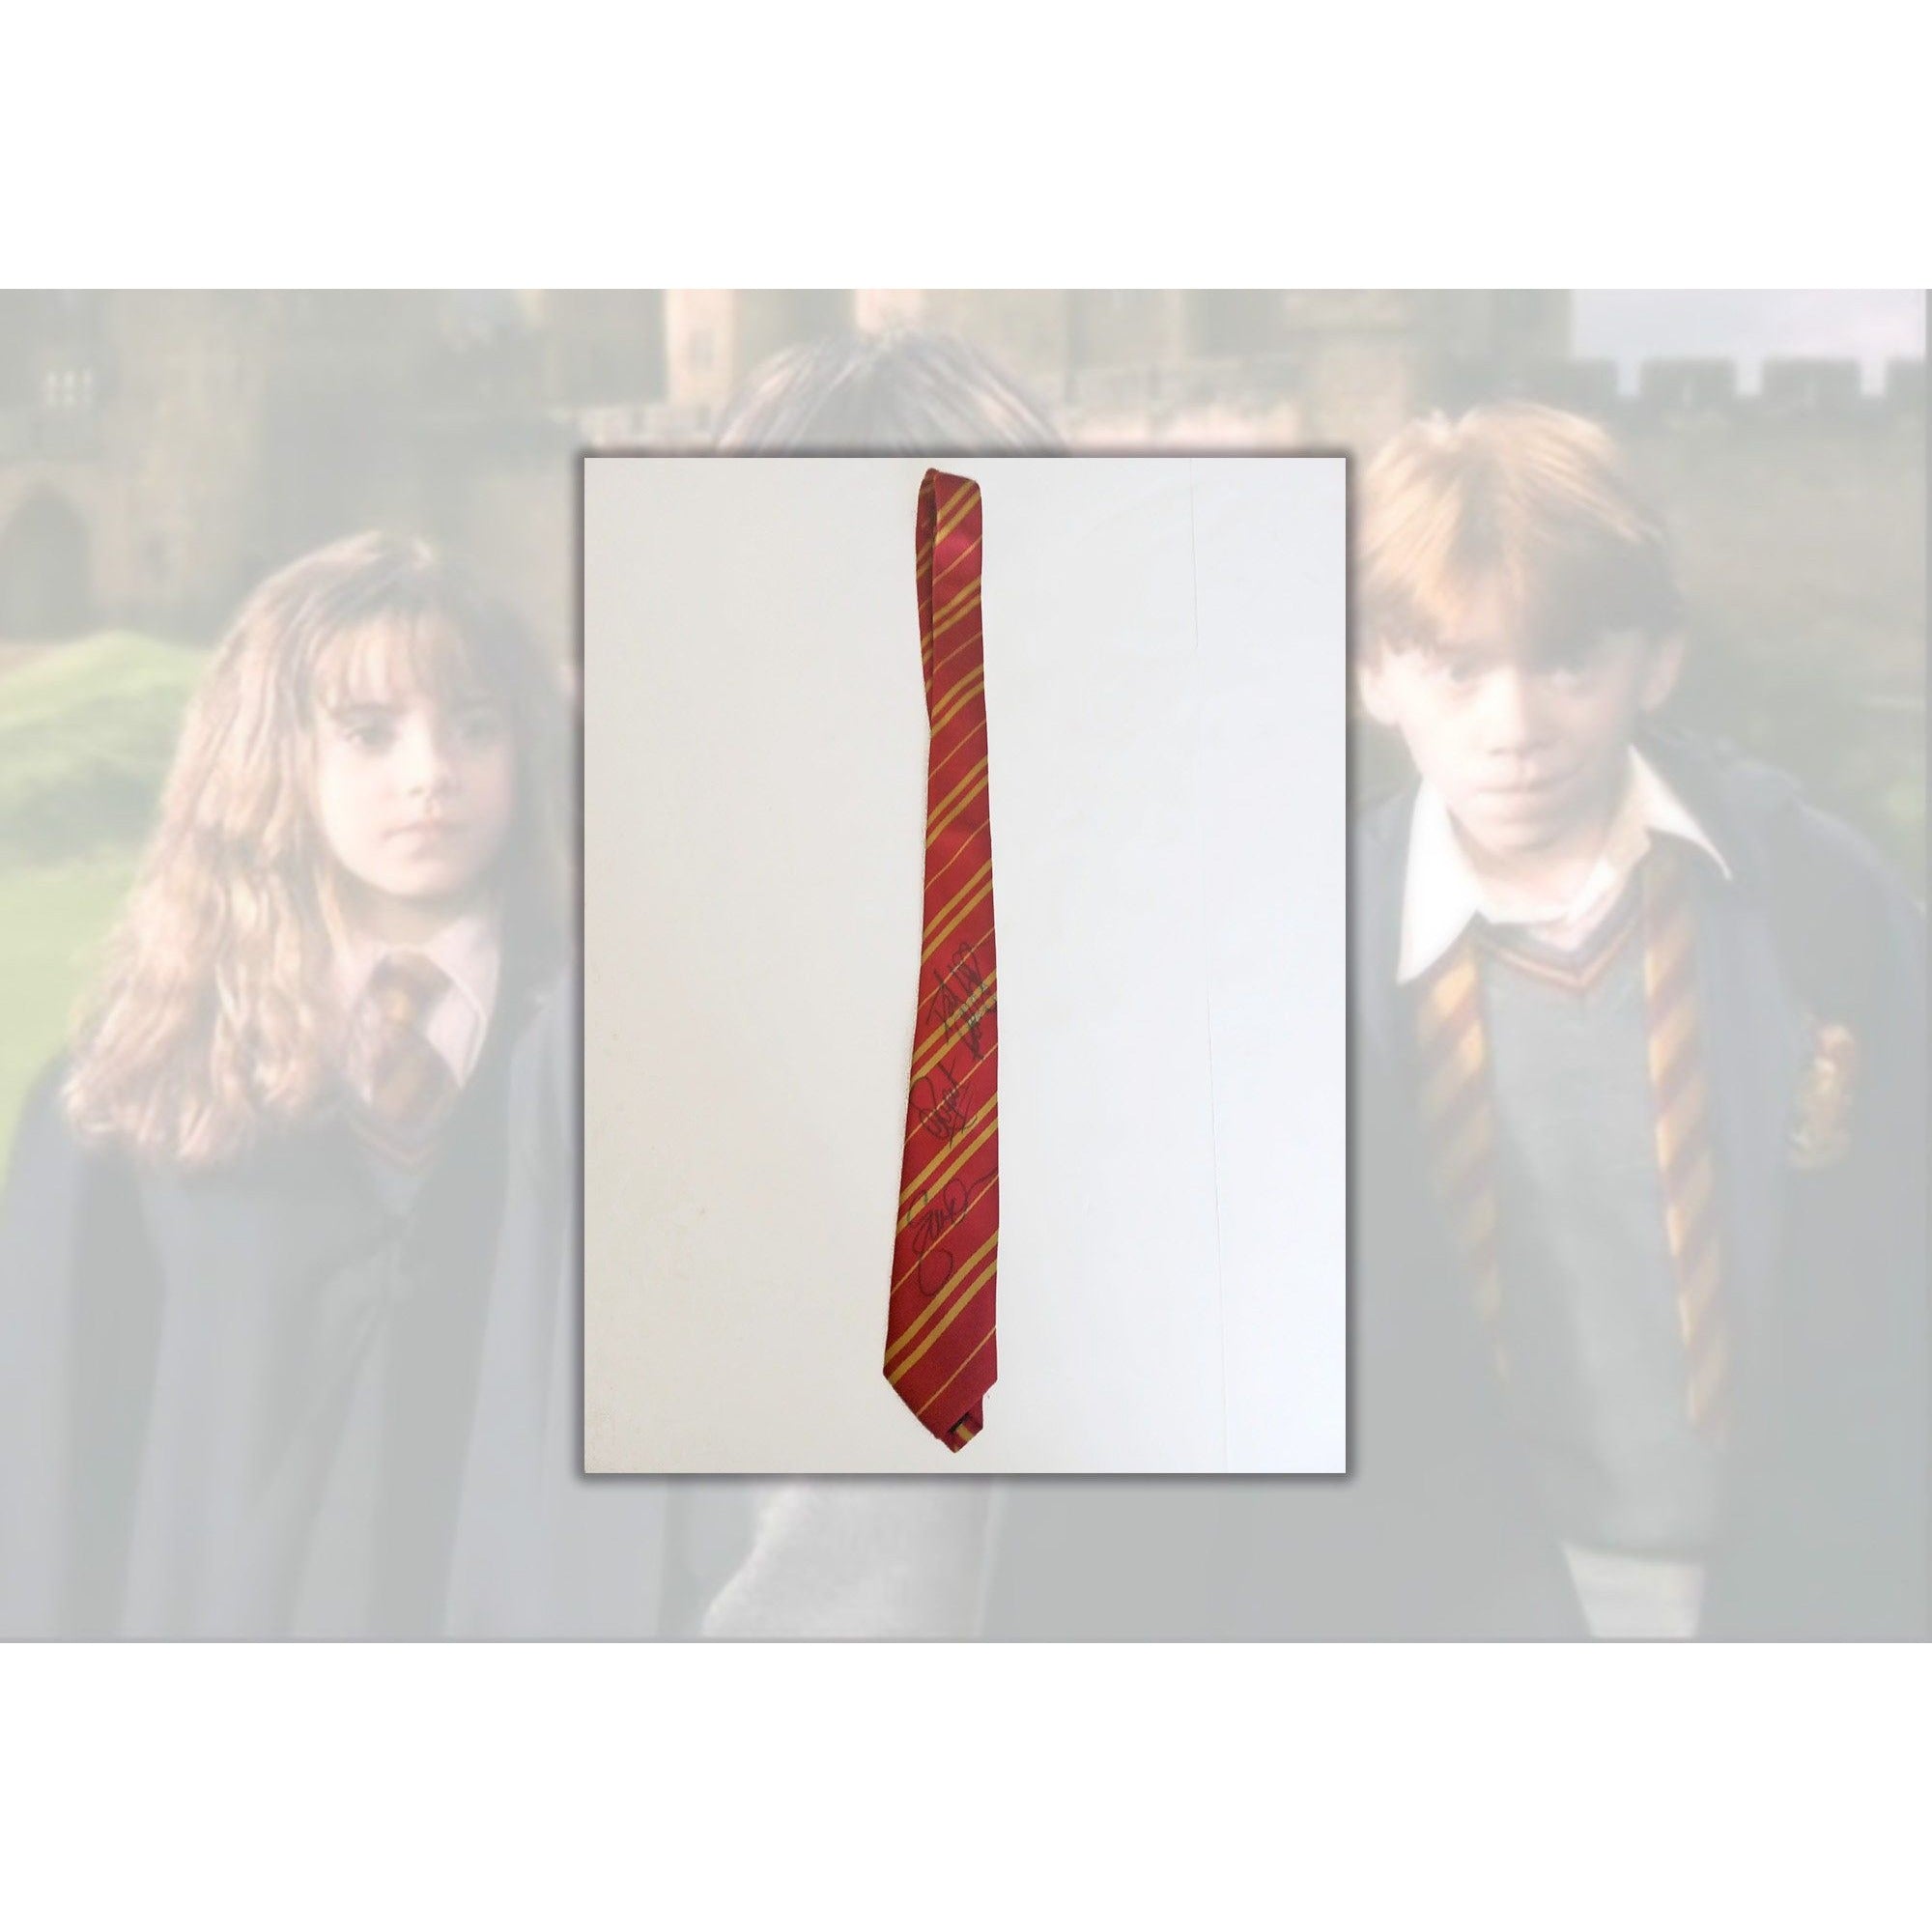 Harry Potter tie Emma Watson, Rupert Grint, Daniel Radcliffe signed with proof